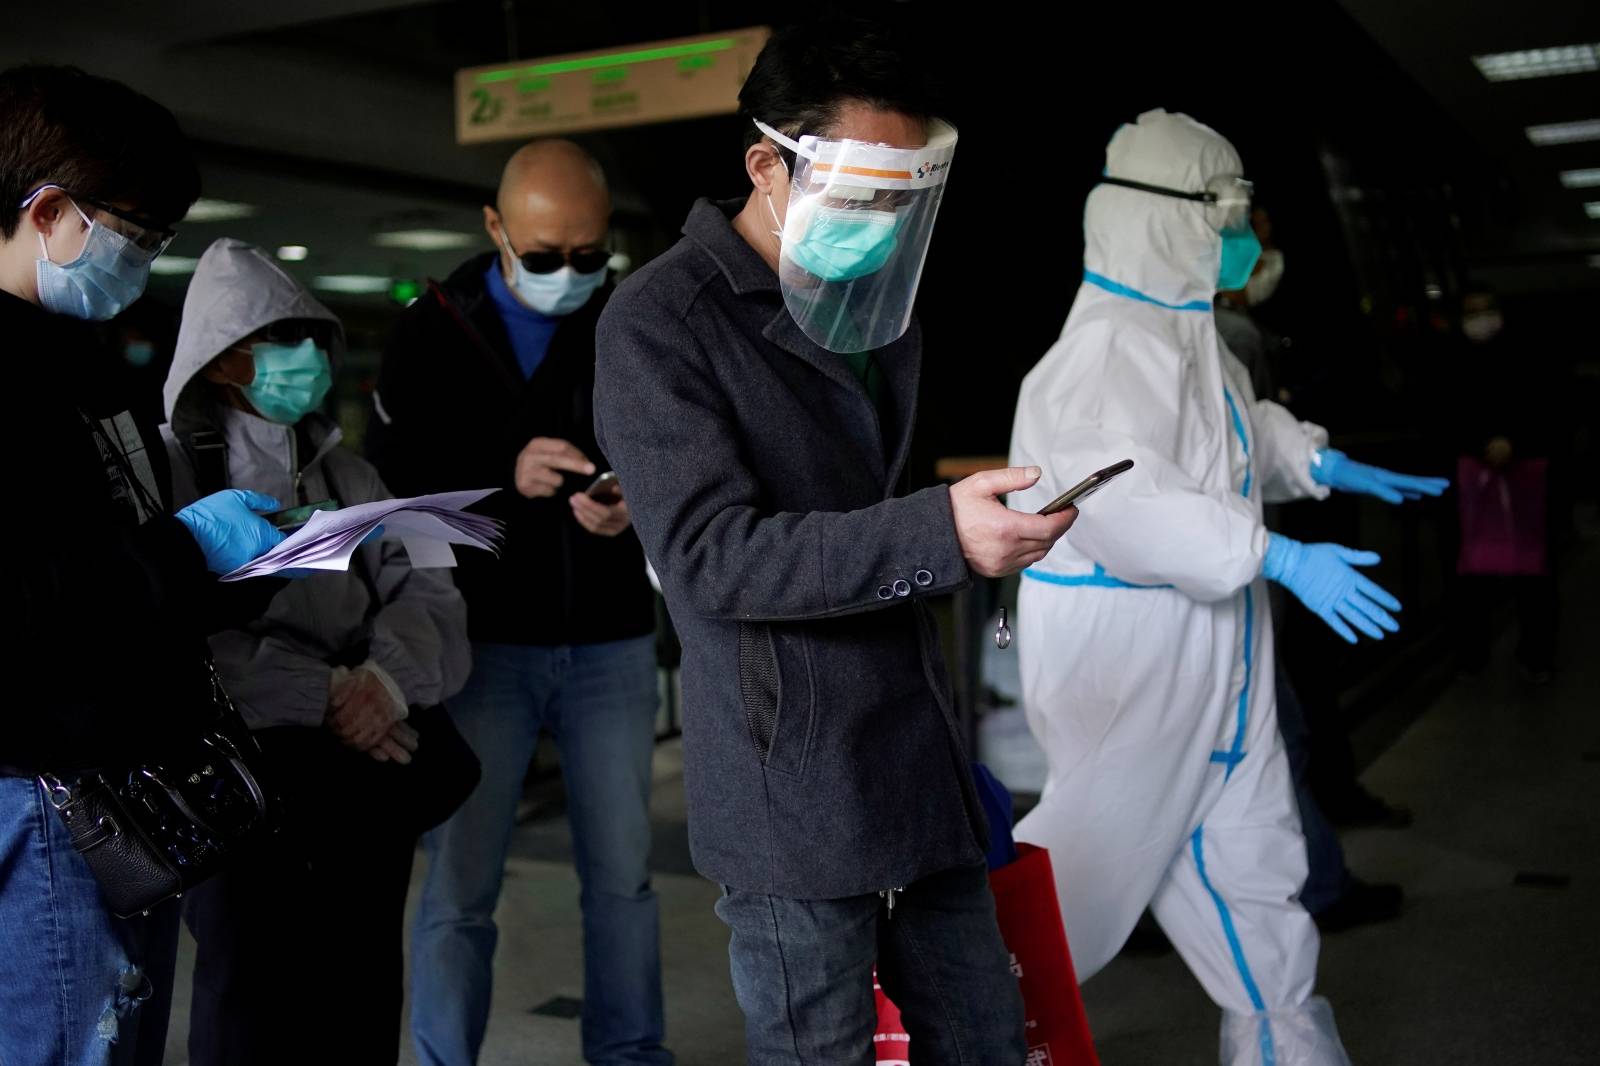 Trader He Ximing, 52, a recovered COVID-19 patient who tested positive for the virus' antibodies after a number of negative tests, walks past a blocked fresh food market after the lockdown was lifted in Wuhan